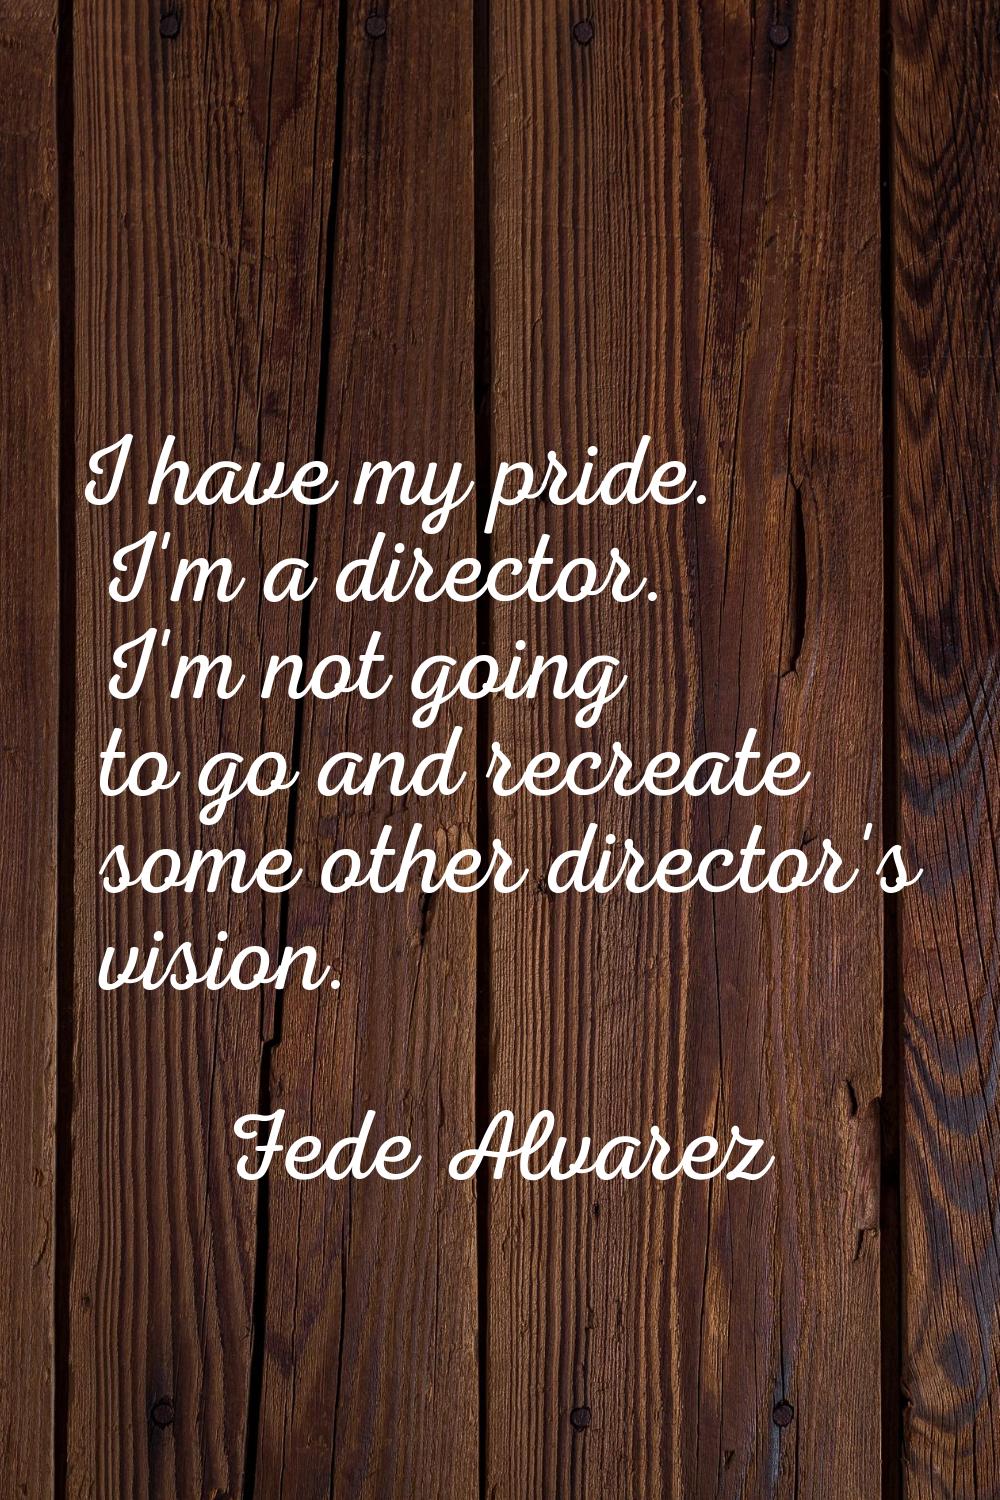 I have my pride. I'm a director. I'm not going to go and recreate some other director's vision.